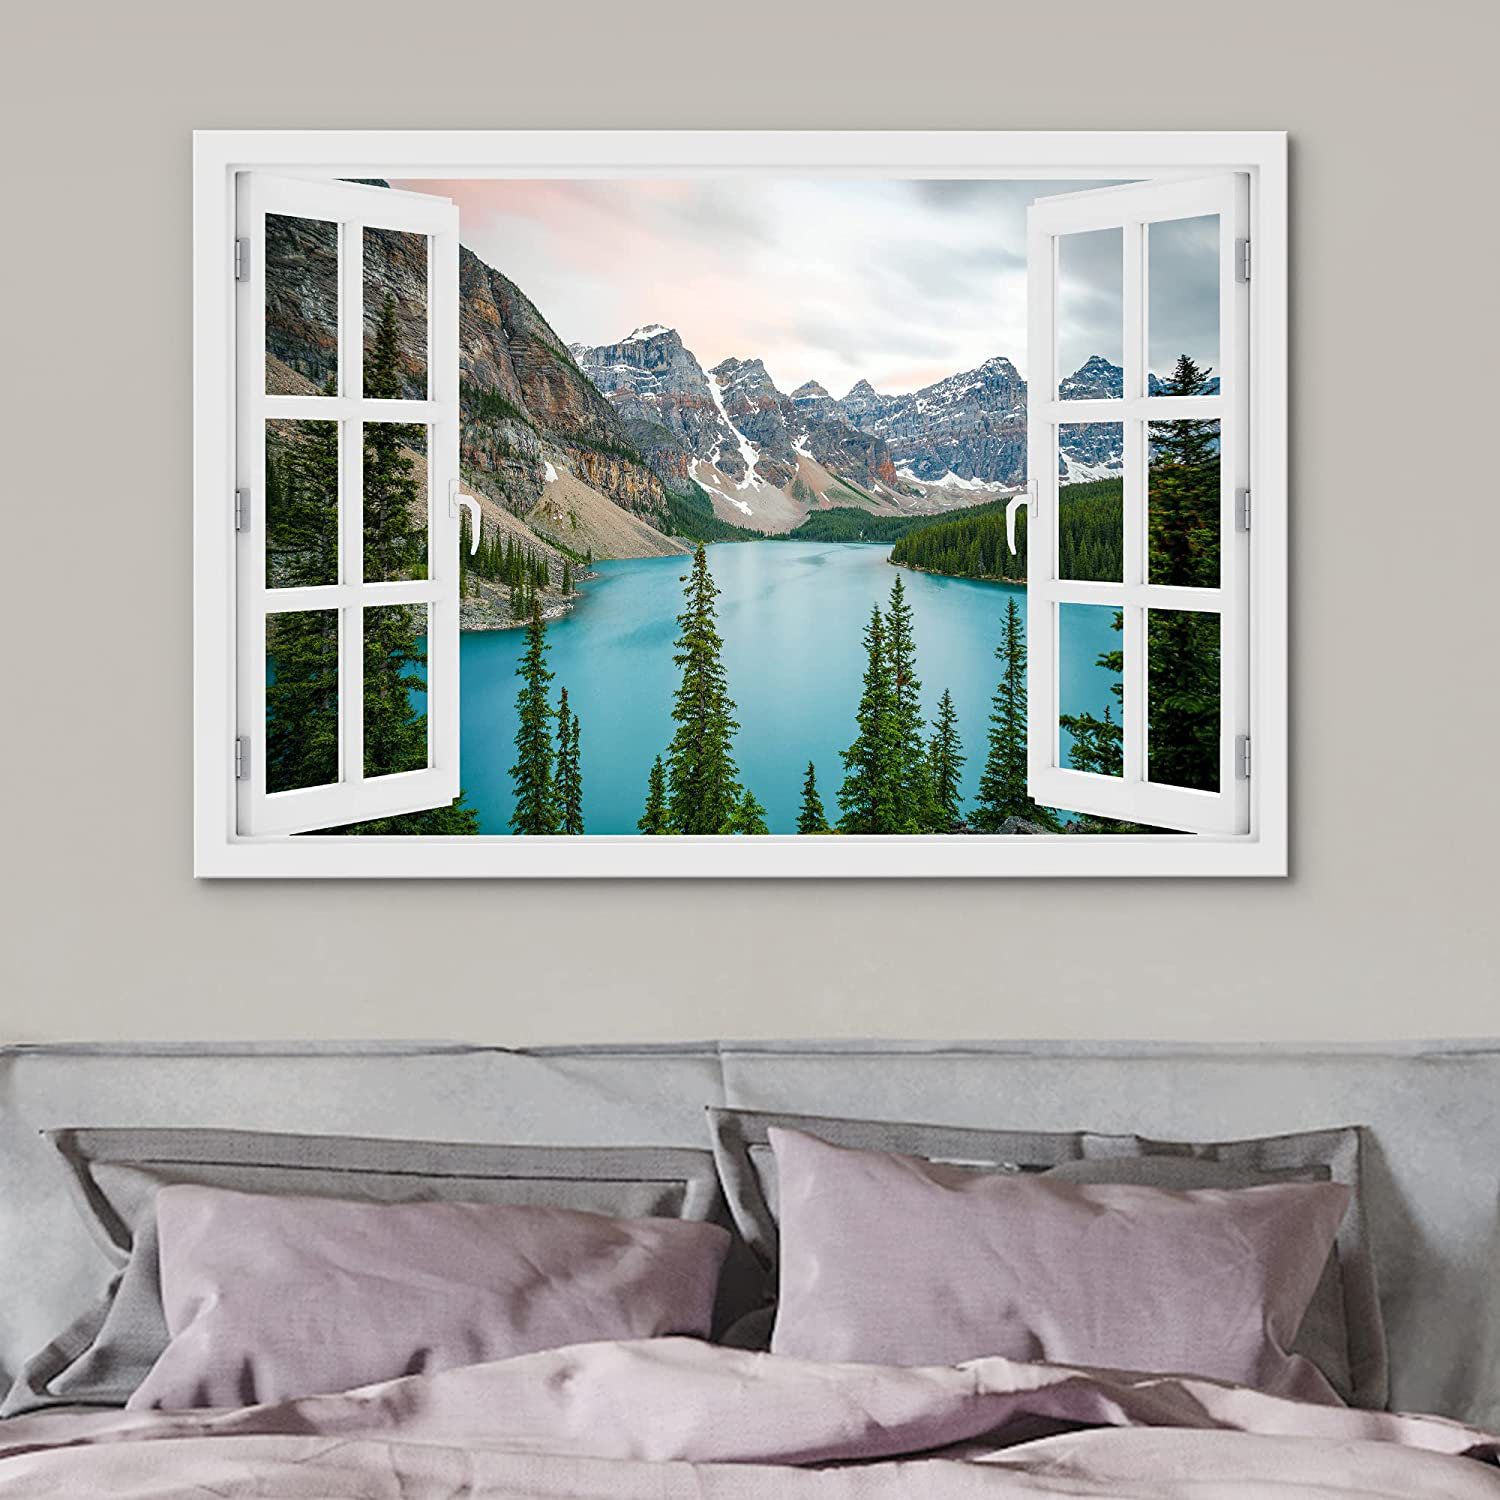 Idea4wall Scenic Spring Mountain Lake – Unframed Graphic Art On Canvas |  Wayfair In Mountain Lake Wall Art (View 15 of 15)